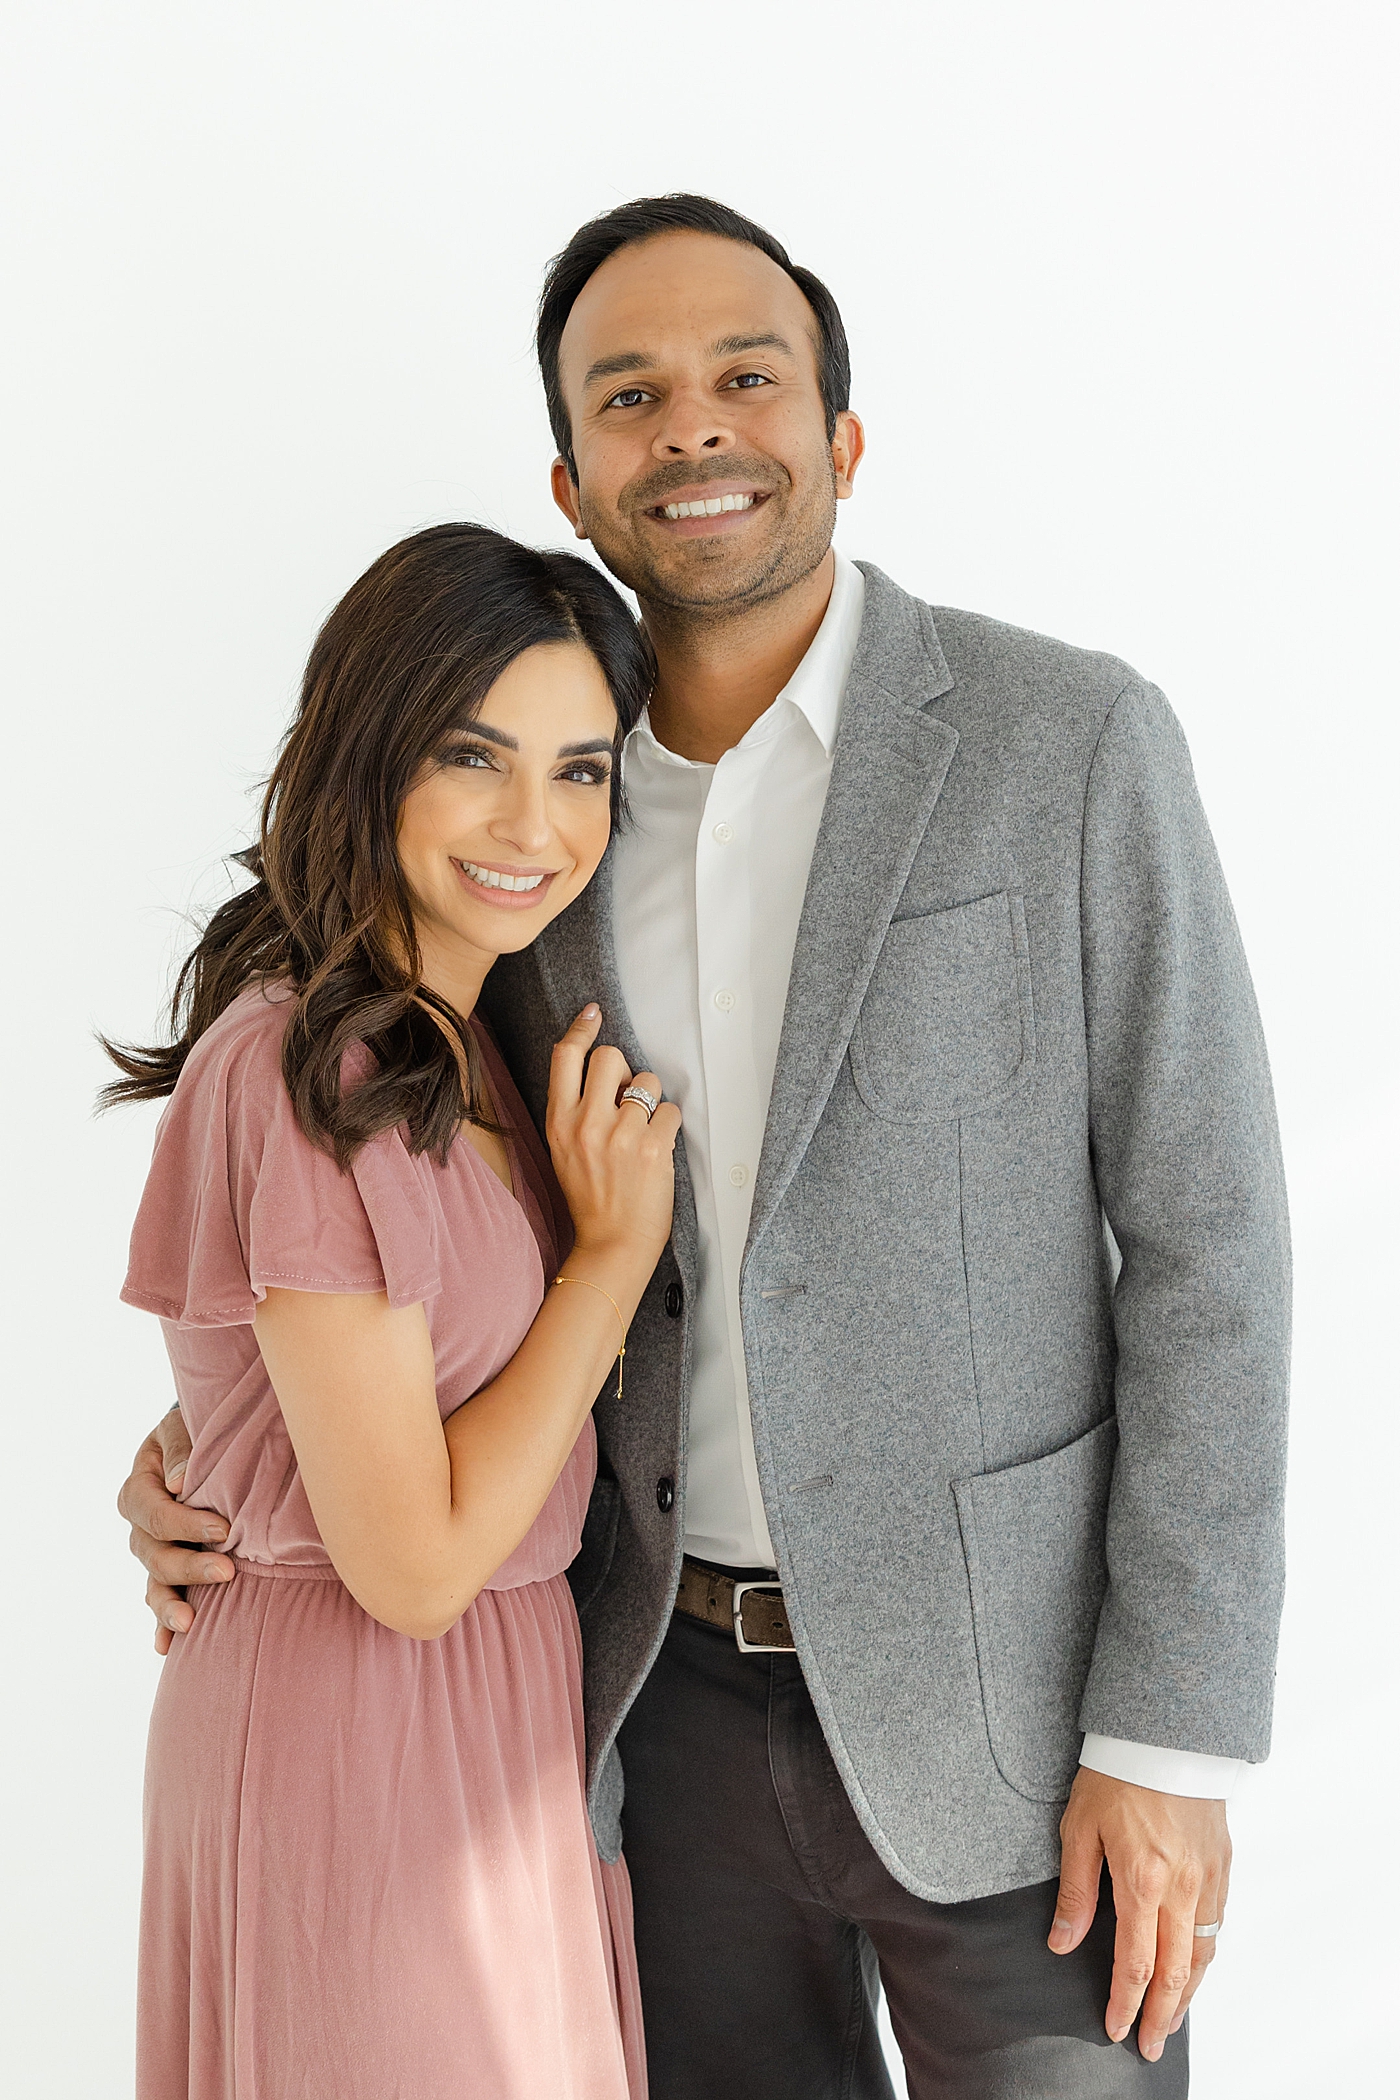 Mom and dad in pink and gray snuggling in the studio | Image by Sana Ahmed Photography